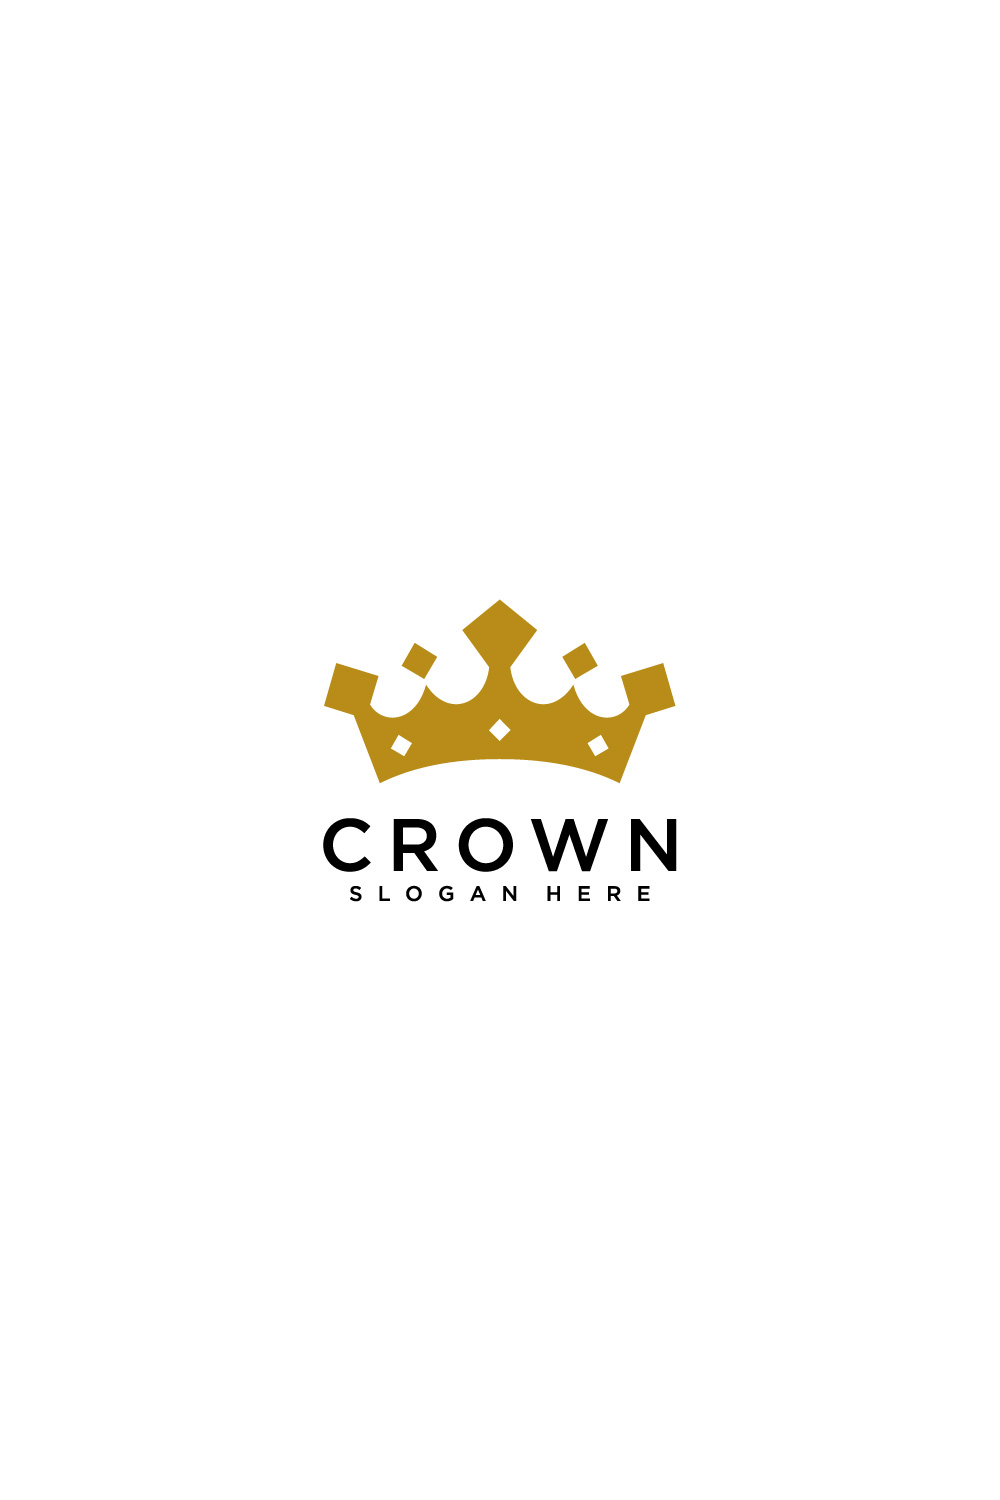 crown vector design icon template pinterest preview image.